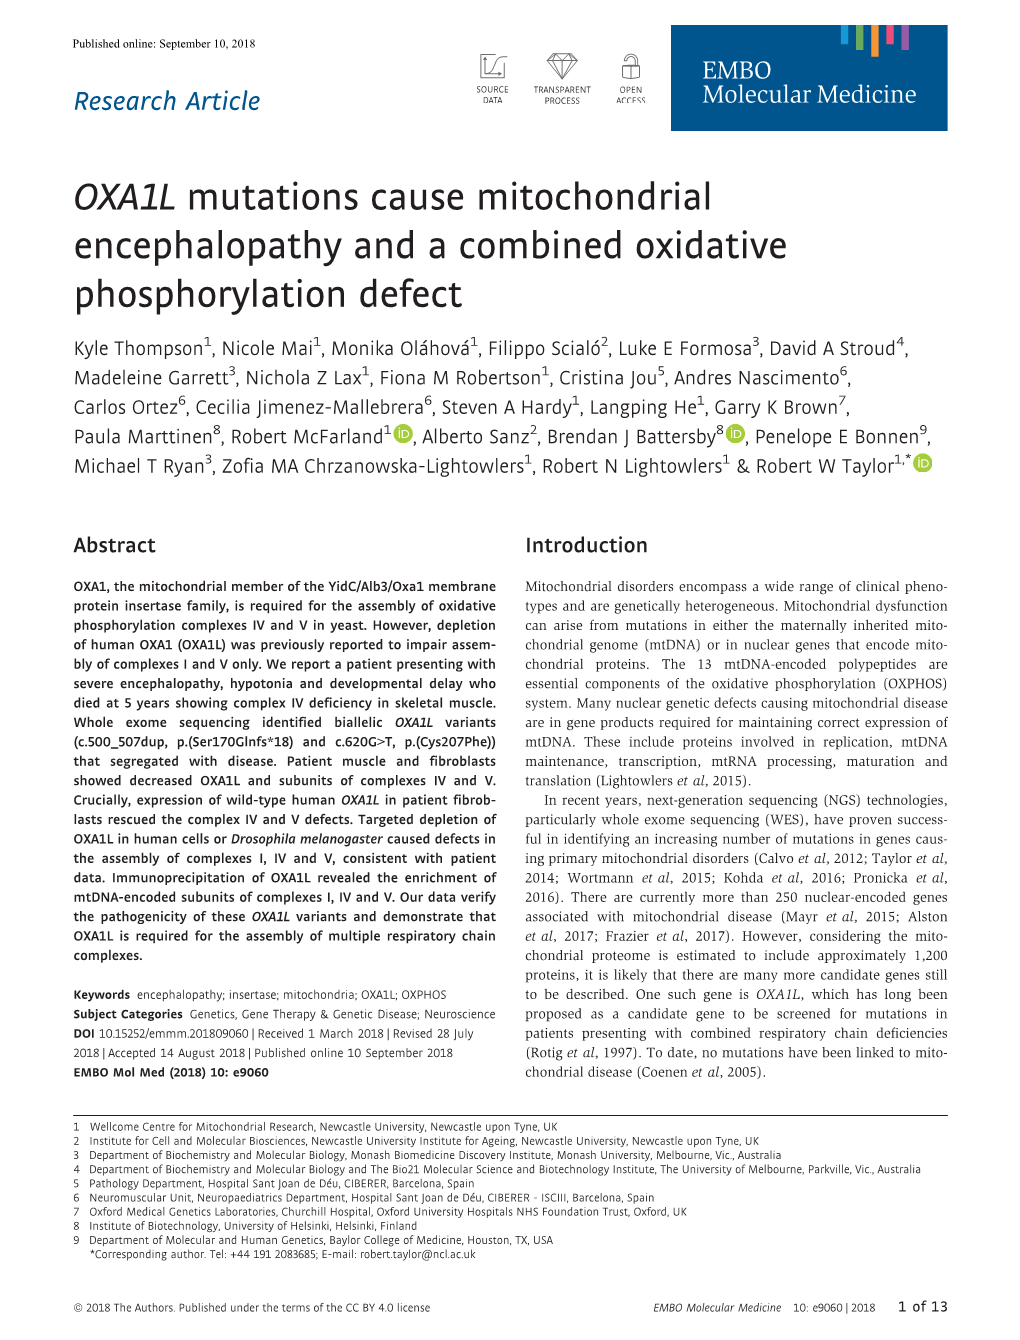 OXA1L Mutations Cause Mitochondrial Encephalopathy and a Combined Oxidative Phosphorylation Defect